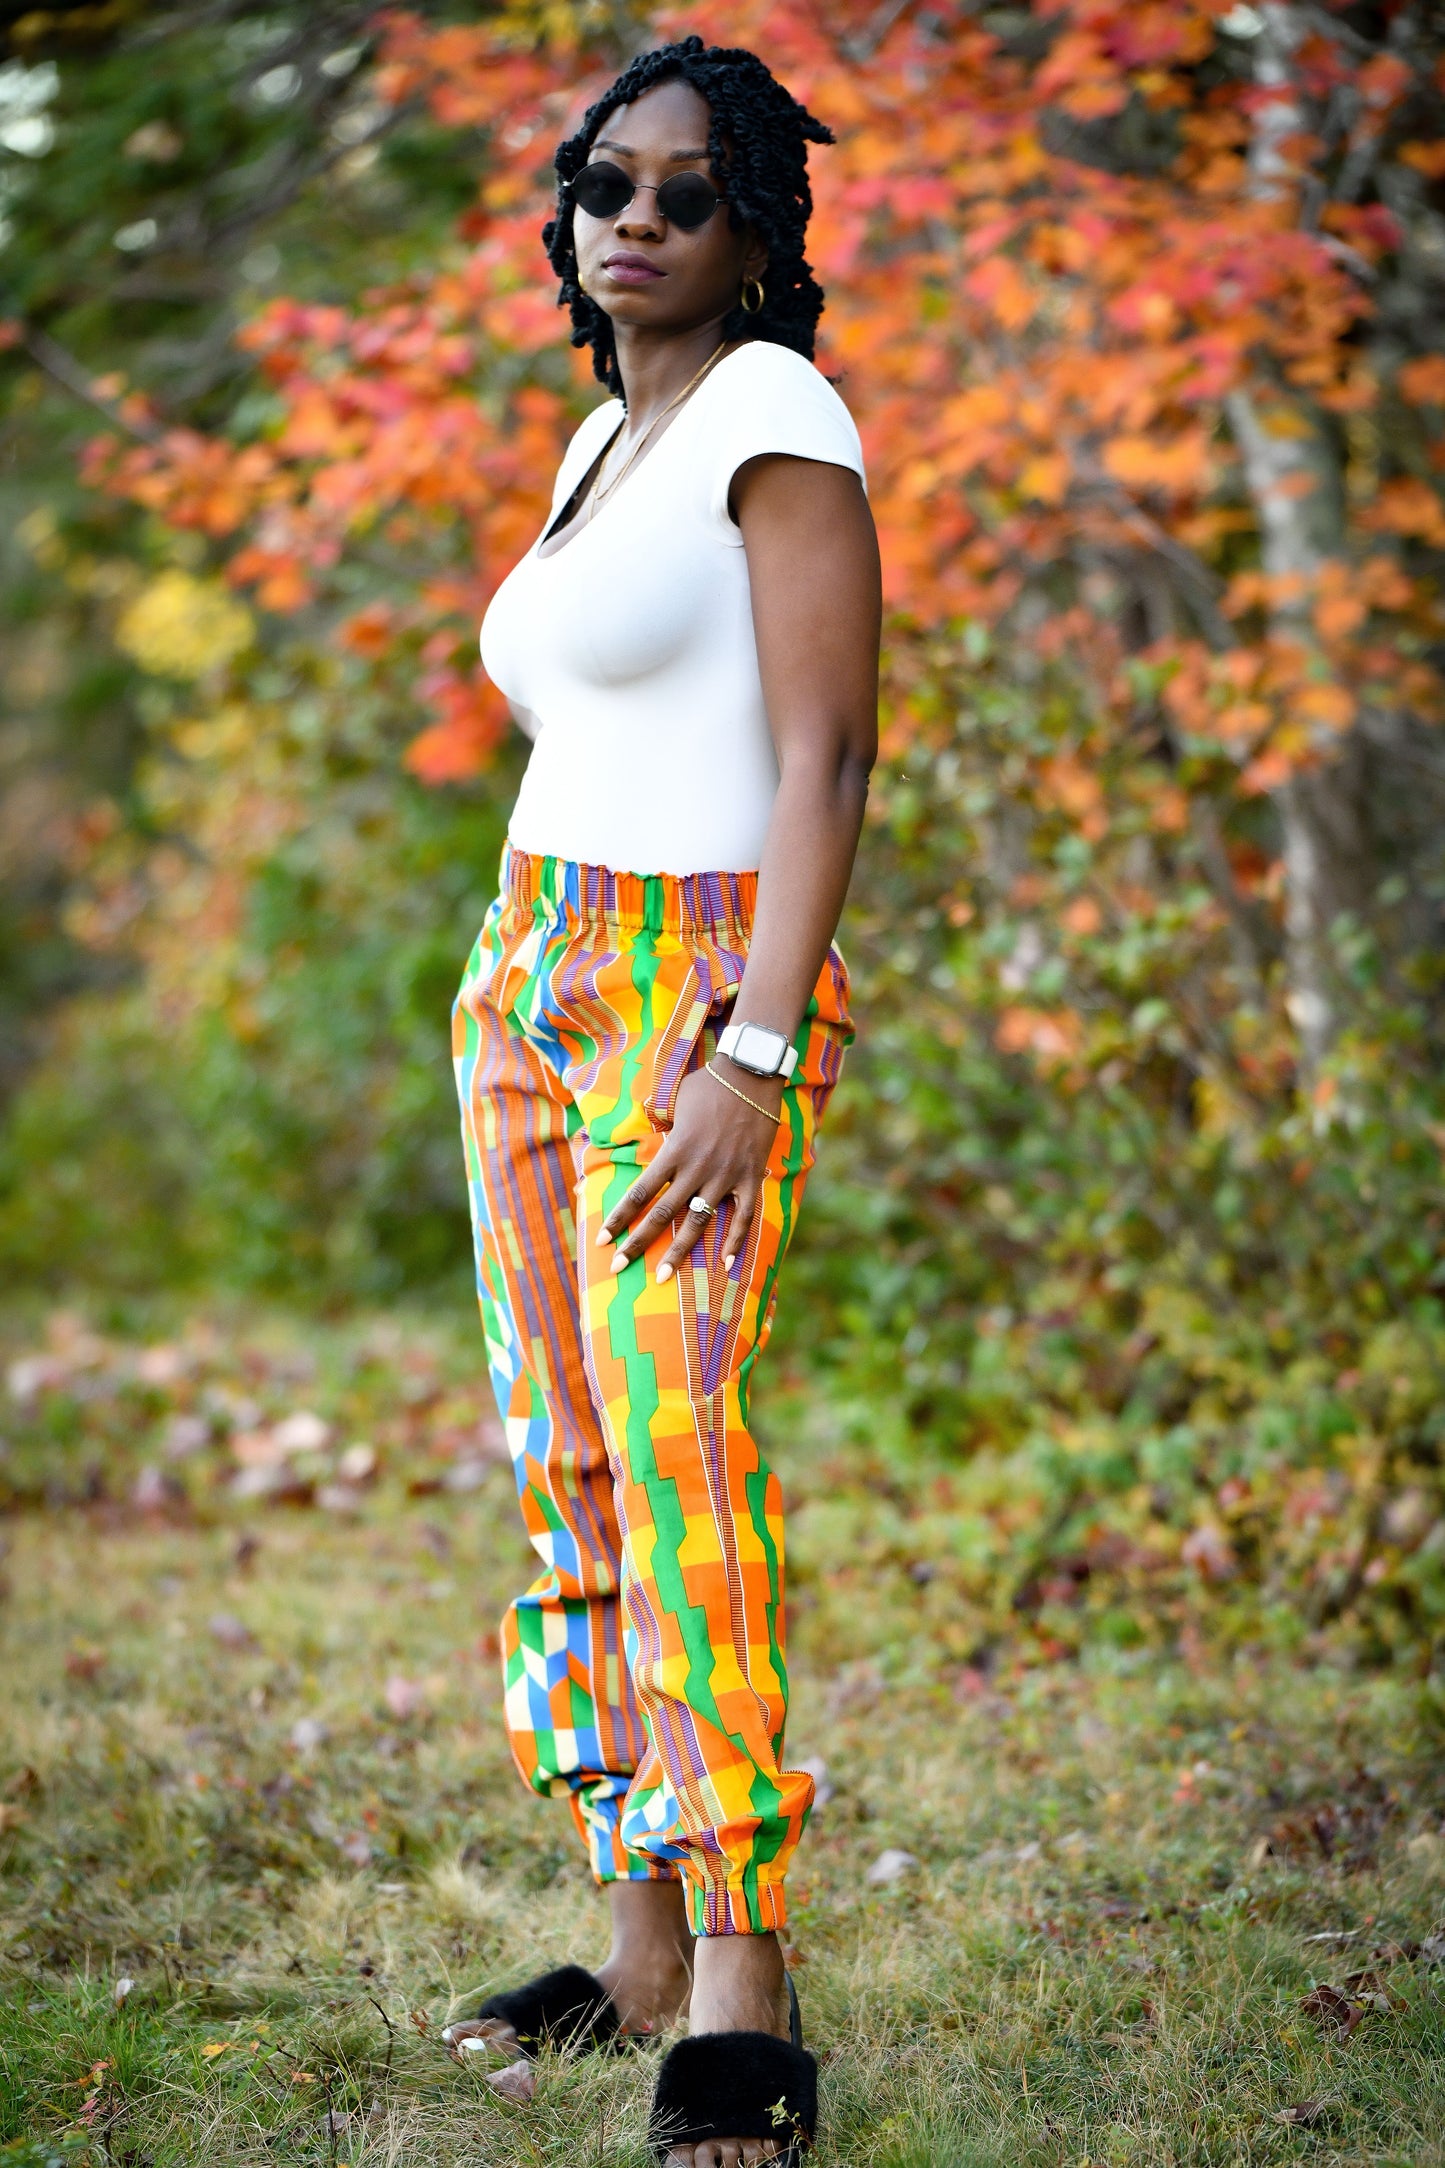 Ally African Print Jogger Pant